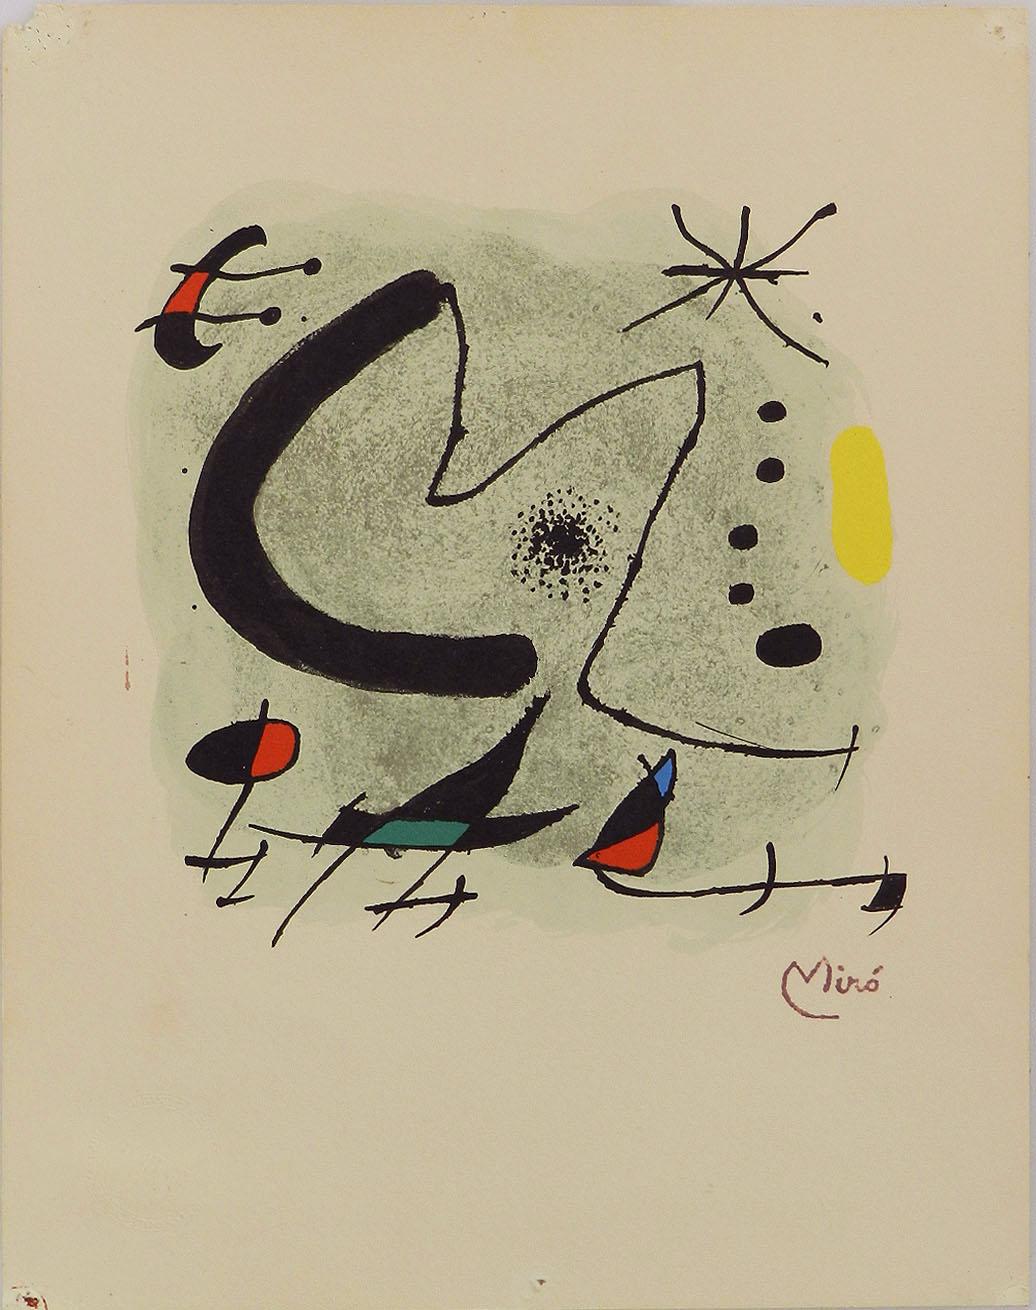 Joan Miró Abstract Print - Joan Miro Abstract M for Bolaffiarte Limited Edition Photolithograph 1972 